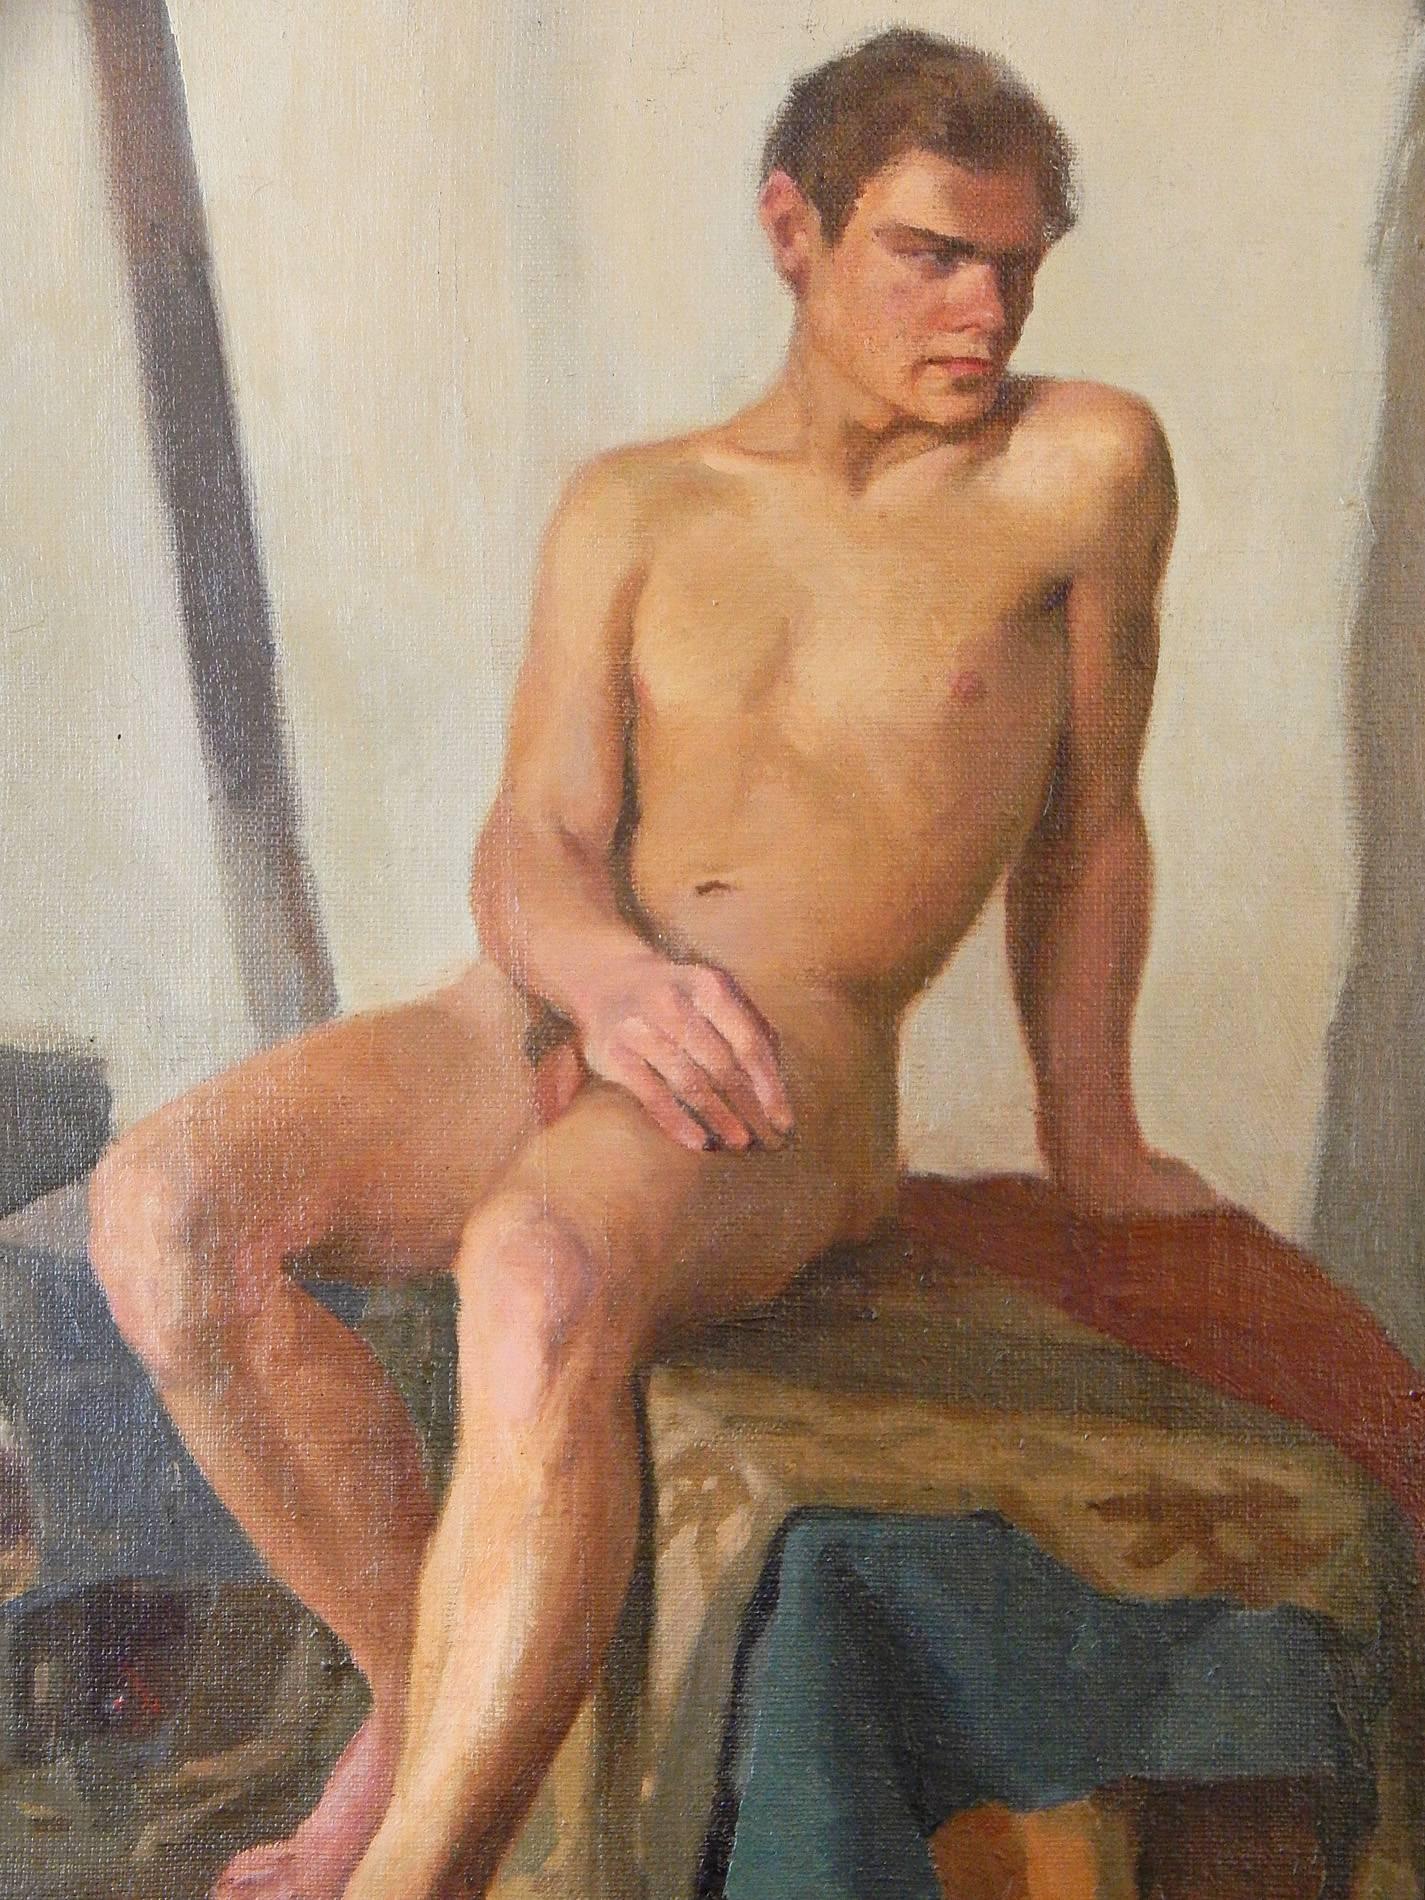 This superb capturing of a young male figure, probably a worker from the fields, was painted by Pyotr Petrovich Konchalovsky, an important artist in the Russian Realist tradition, a founder of the Jack of Diamonds group of avant-garde artists and a